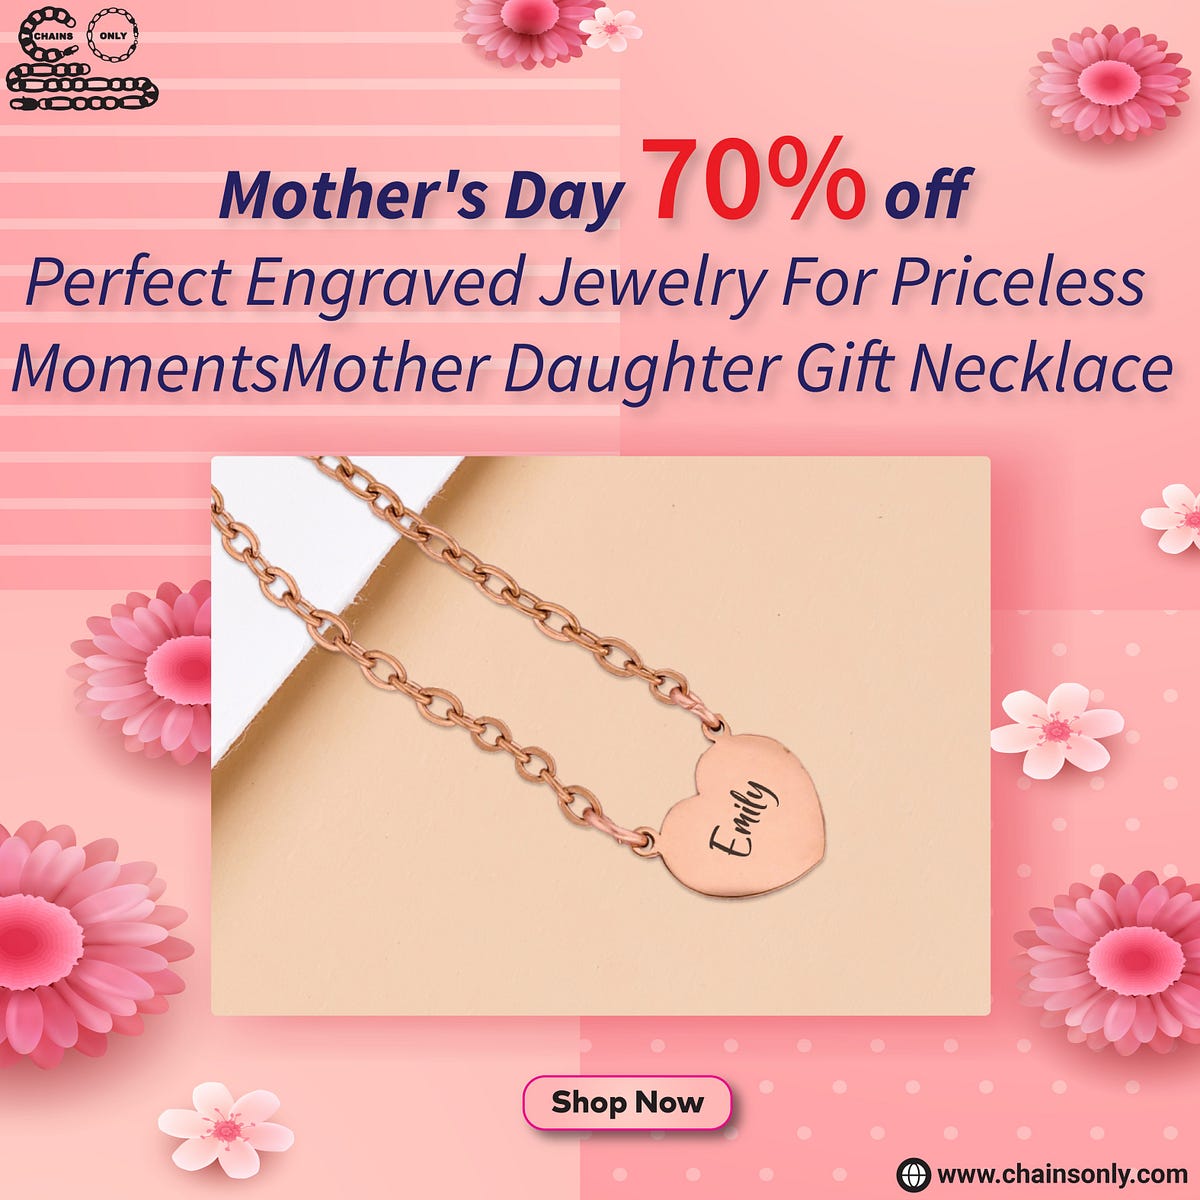 Perfect Engraved Necklace For Priceless Moment - chains only - Medium